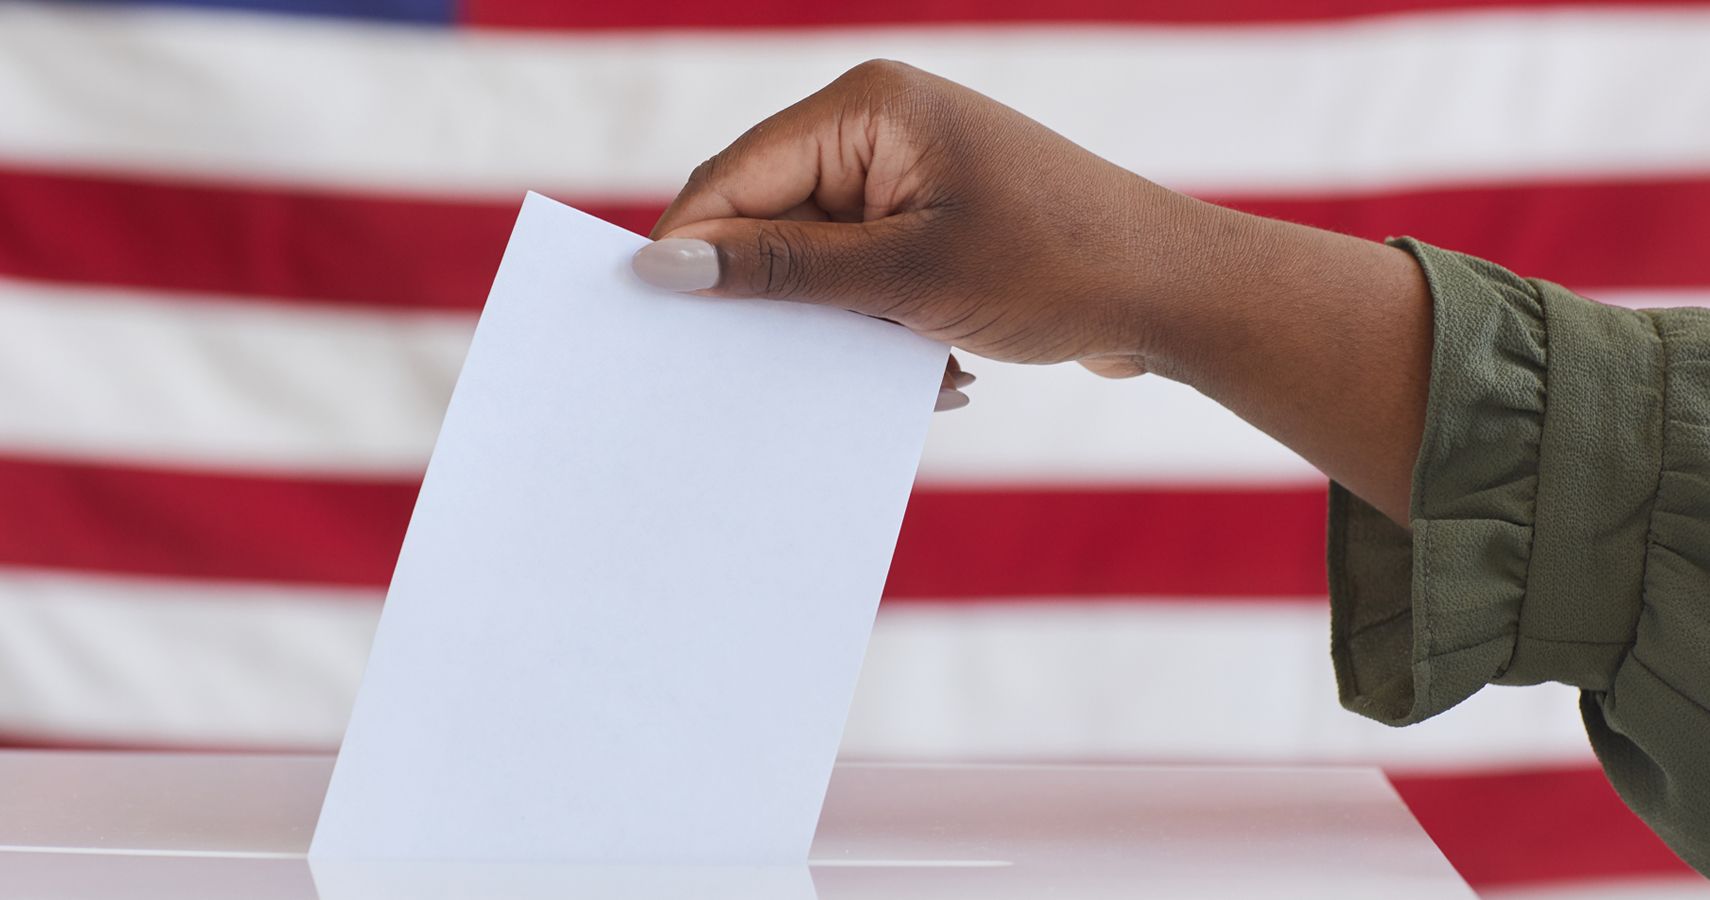 Mom’s Reaction To Her Son Voting Independent Goes Viral